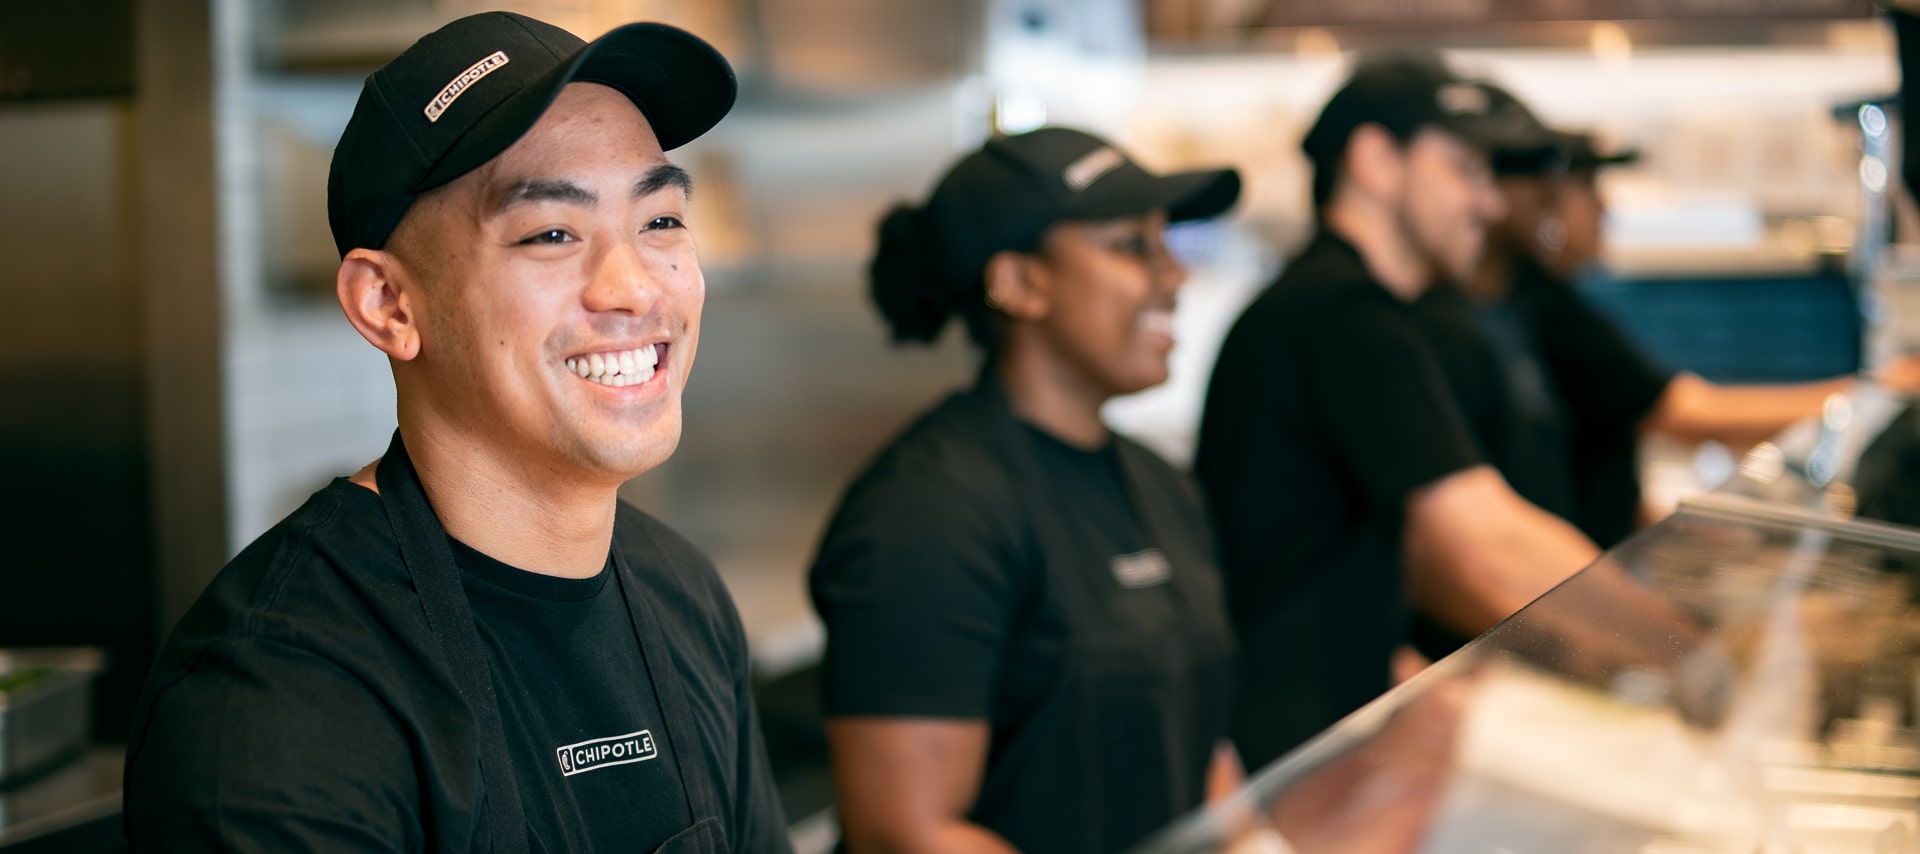 Learn About Chipotle Restaurant and Explore Our Jobs and Careers